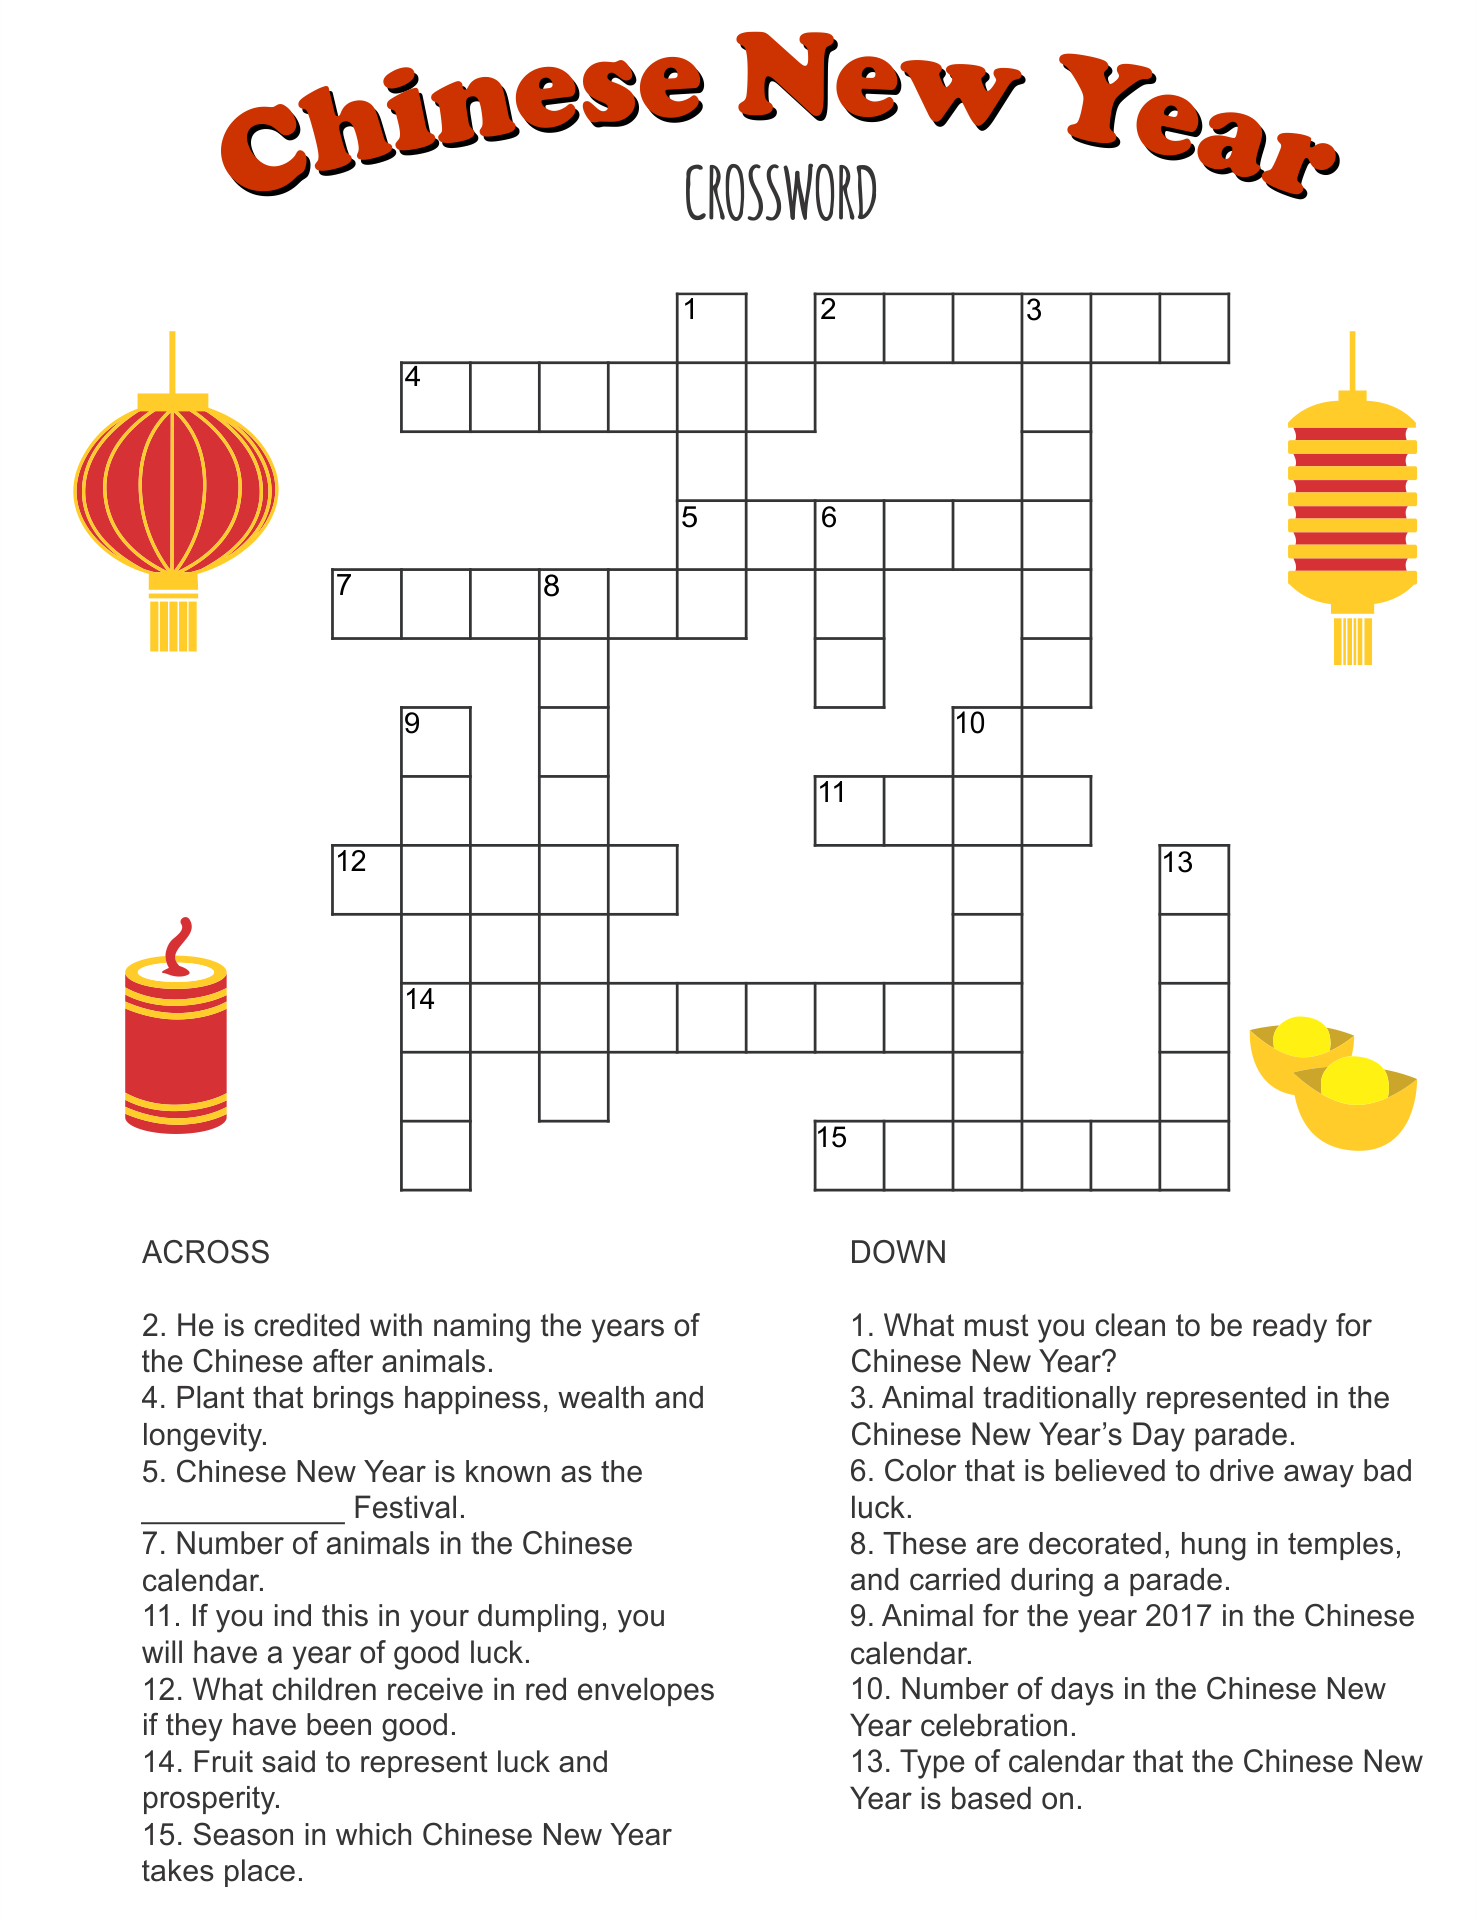 6 Best Images of Easy Printable Puzzles Free Printable Easy Crossword